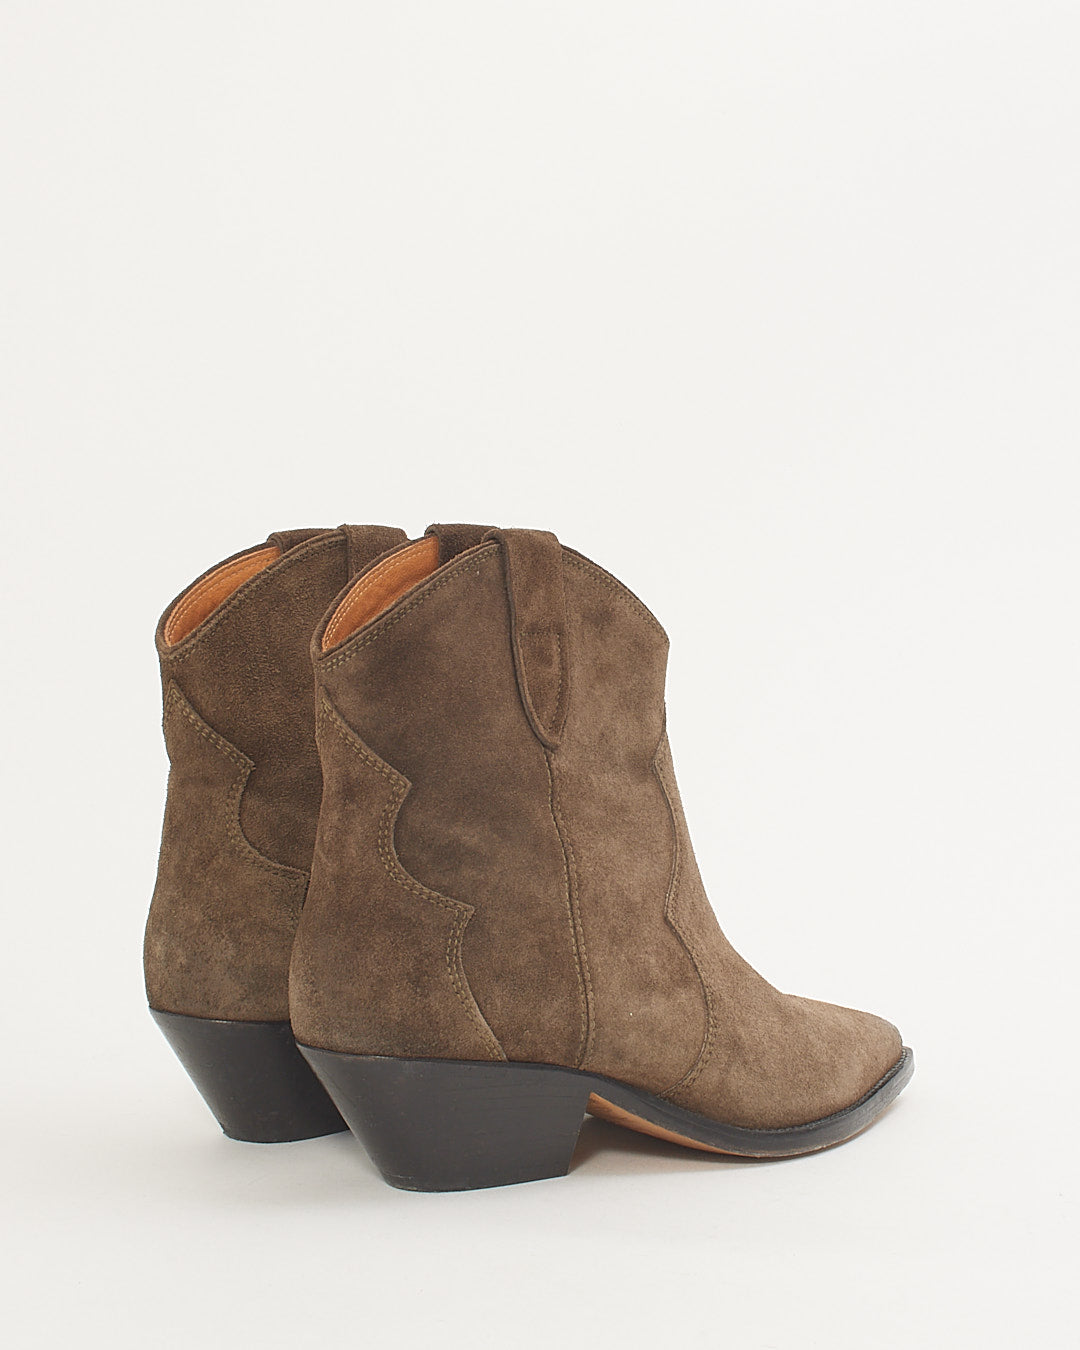 Isabel Marant Beige Taupe Suede Dewina Boots - 39